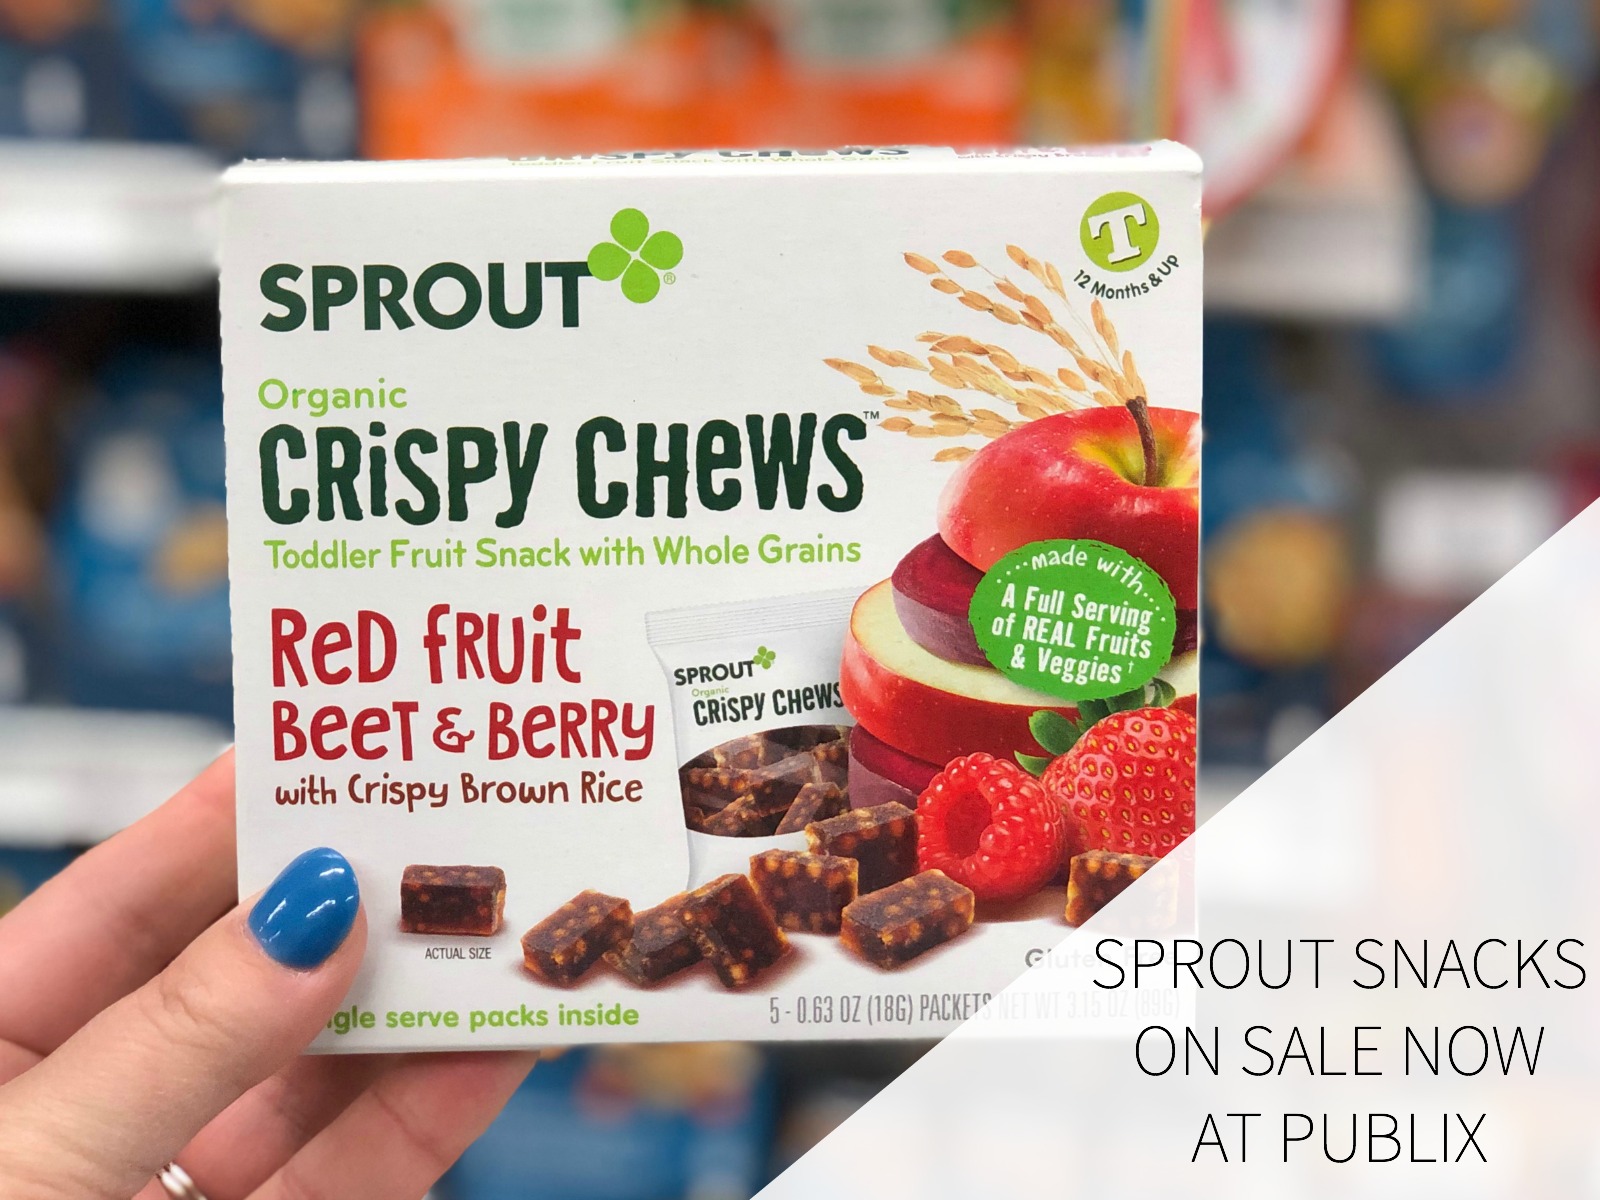 Look For Your Kiddo's Favorite Sprout Snacks On Sale Now At Publix! on I Heart Publix